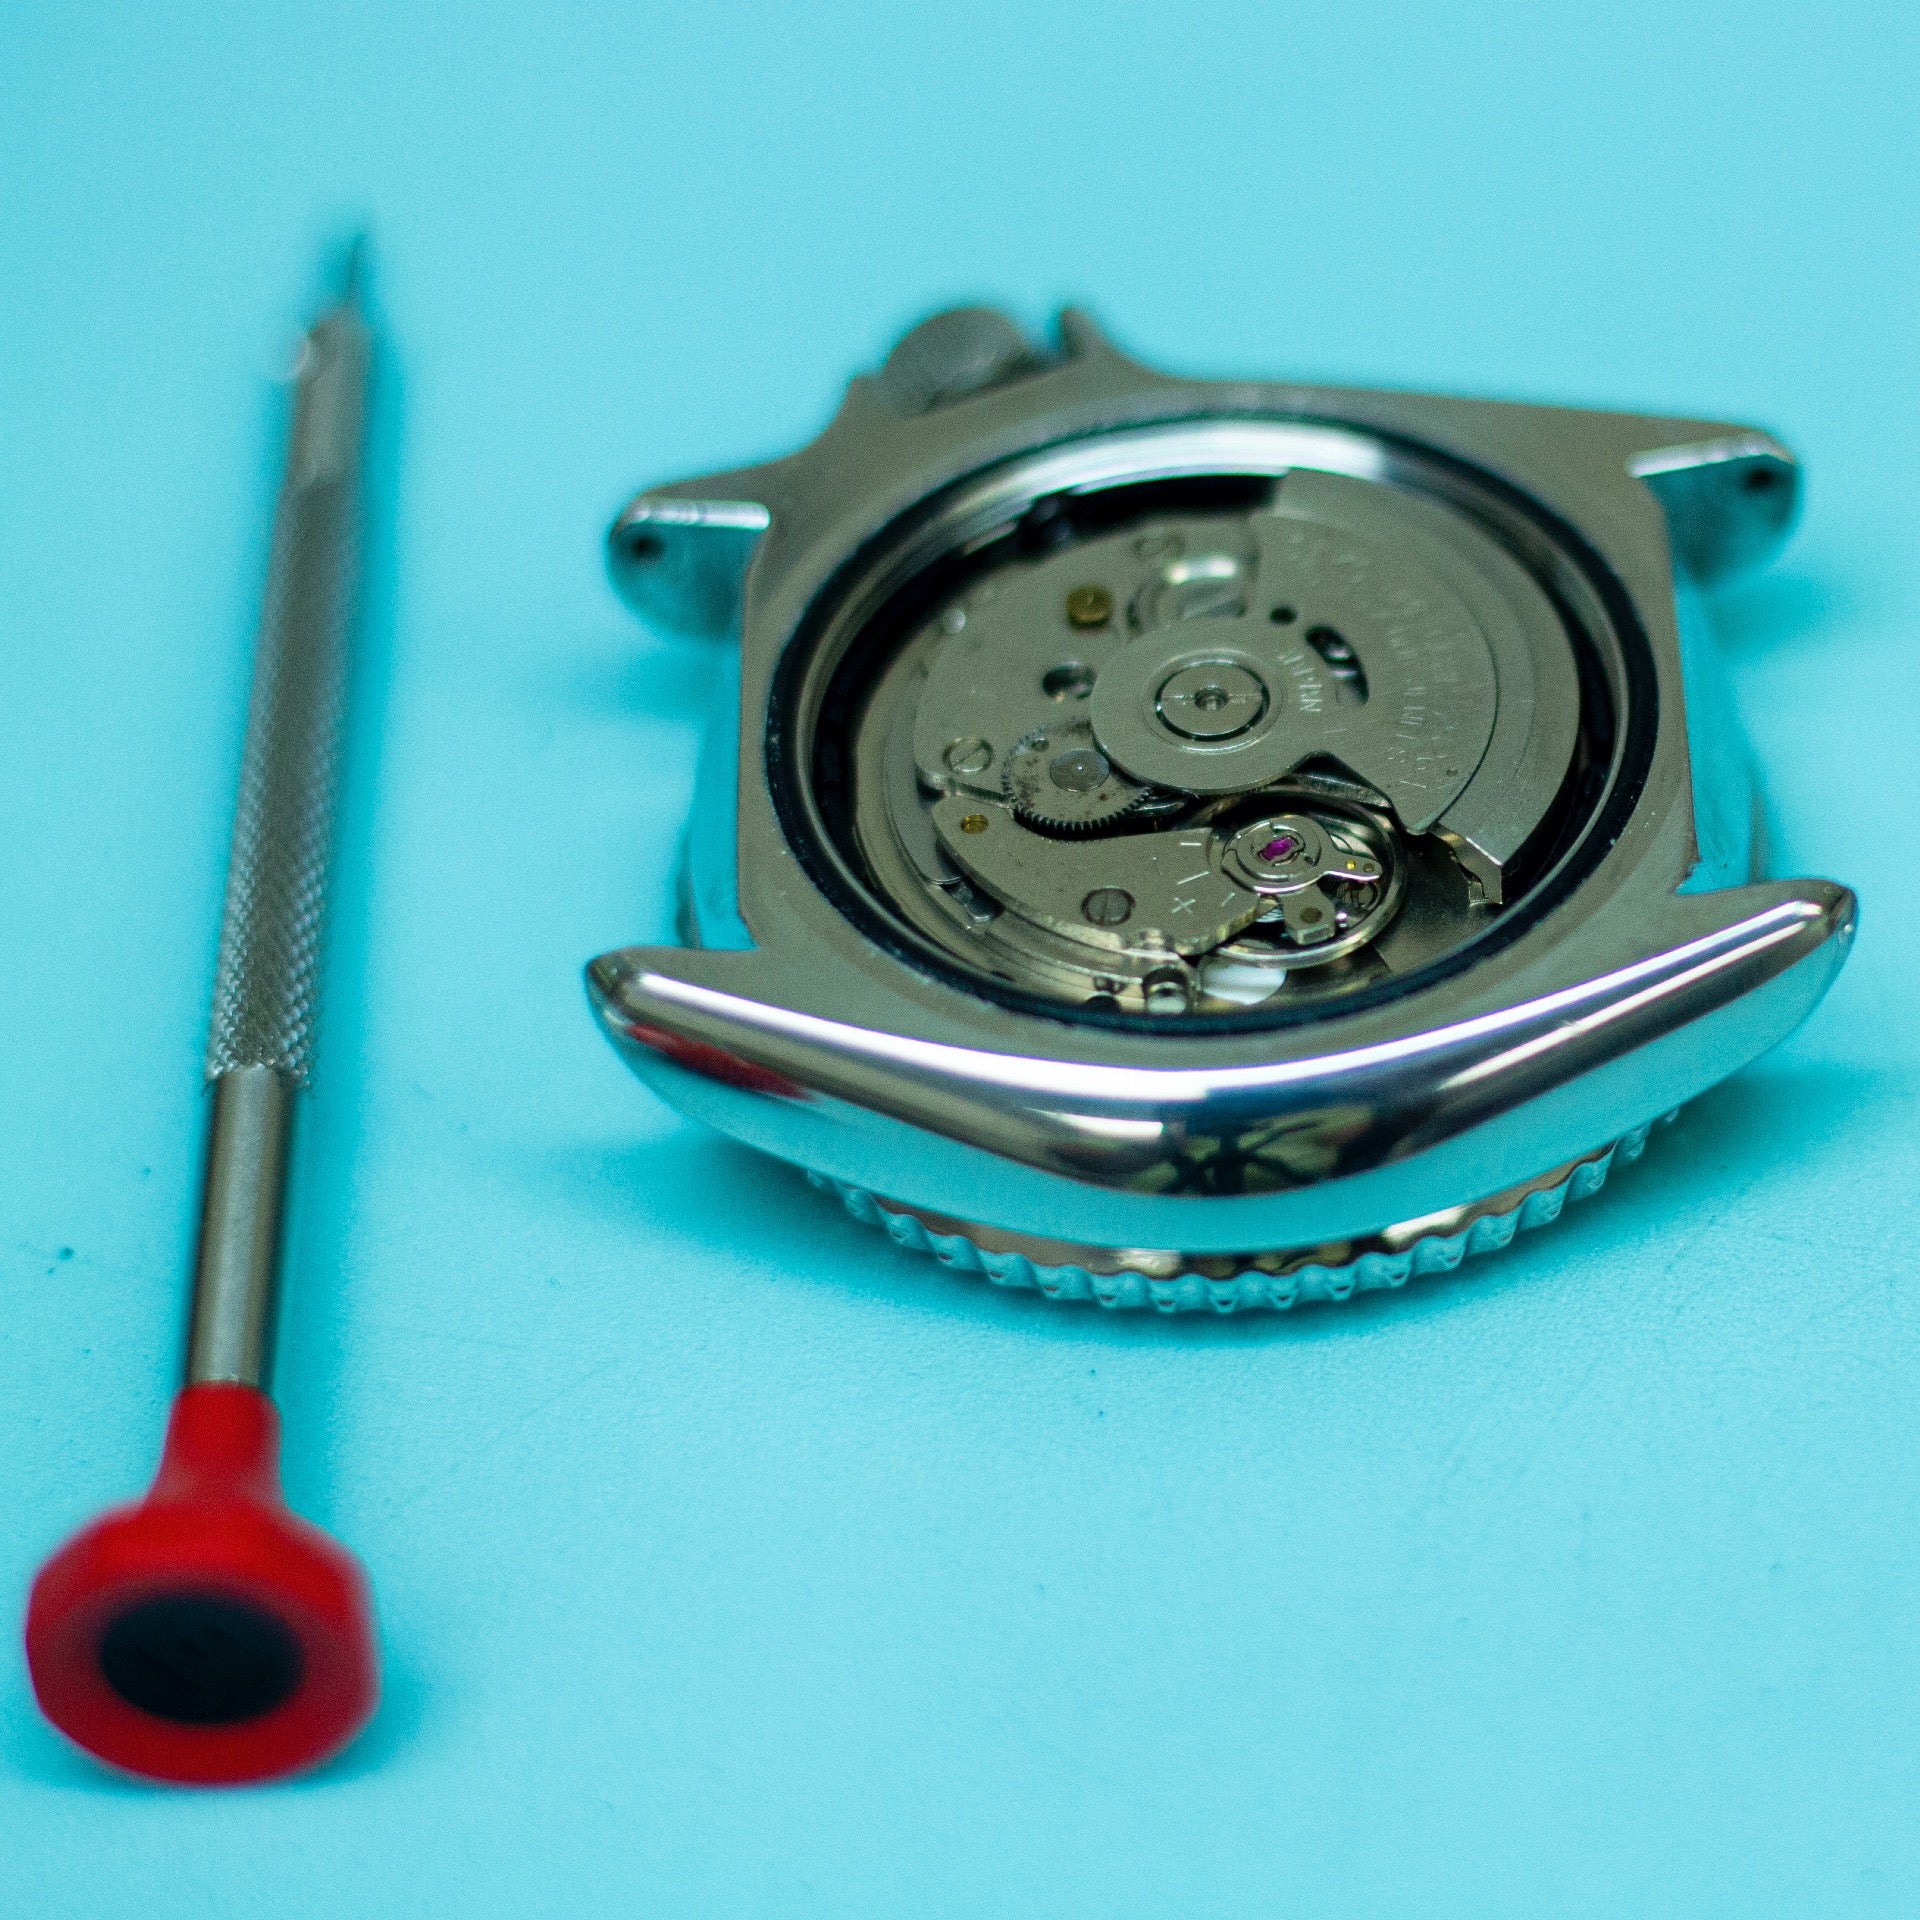 Seiko Watch Repair, Restorations, Crystal, and Battery Replacement –  